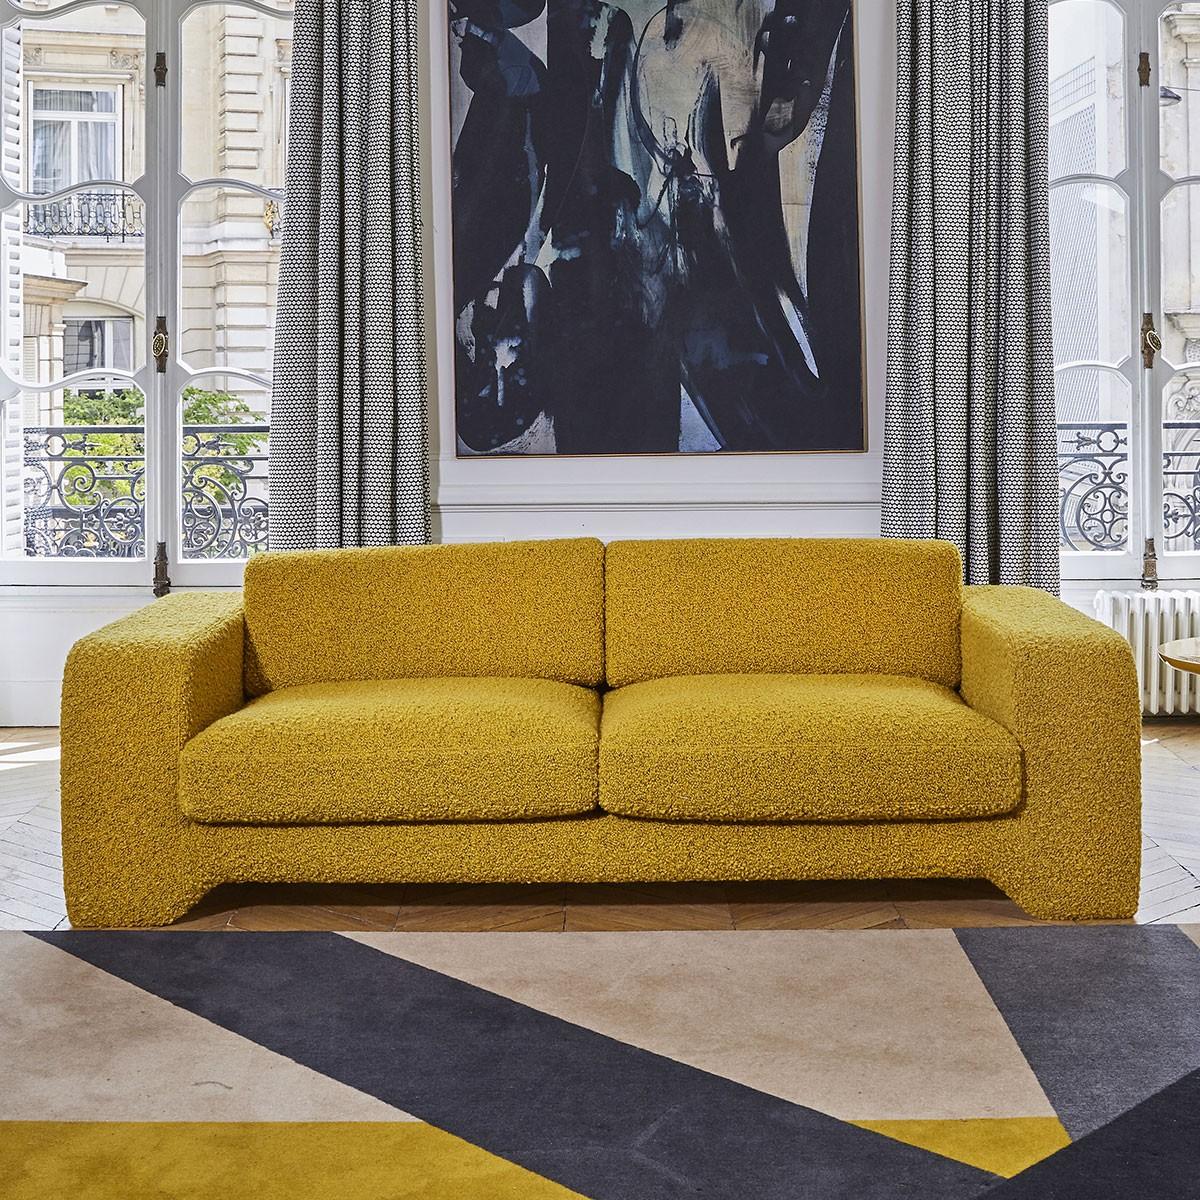 Popus Editions Giovanna 2.5 seater sofa in cognac como velvet upholstery

Giovanna is a sofa with a strong profile. A sober, plush line, with this famous detail that changes everything, so as not to forget its strength of character and this